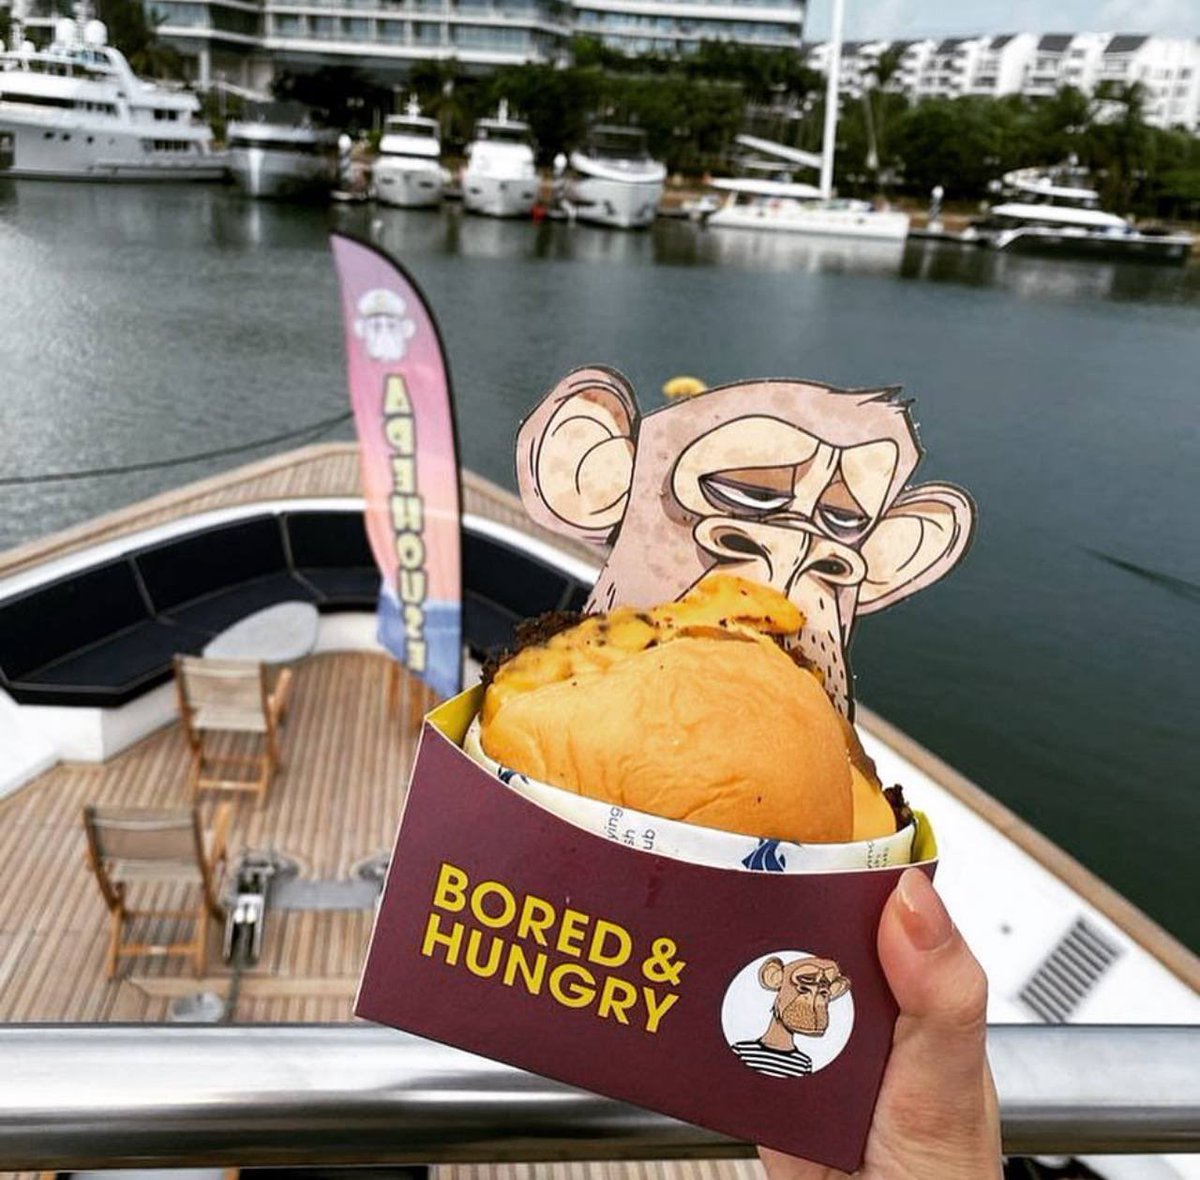 Bored & Hungry closed our lone store in the US and monke jpeg fudders had a field day on it without talking about these: 🍔 @BoredHungryAsia now has 4 stores in Asia (3 in PH, 1 in KR) 🍔 We also did major pop-ups in key Asian markets: SG, HK, & now, Dubai Stay Bored & Hungry